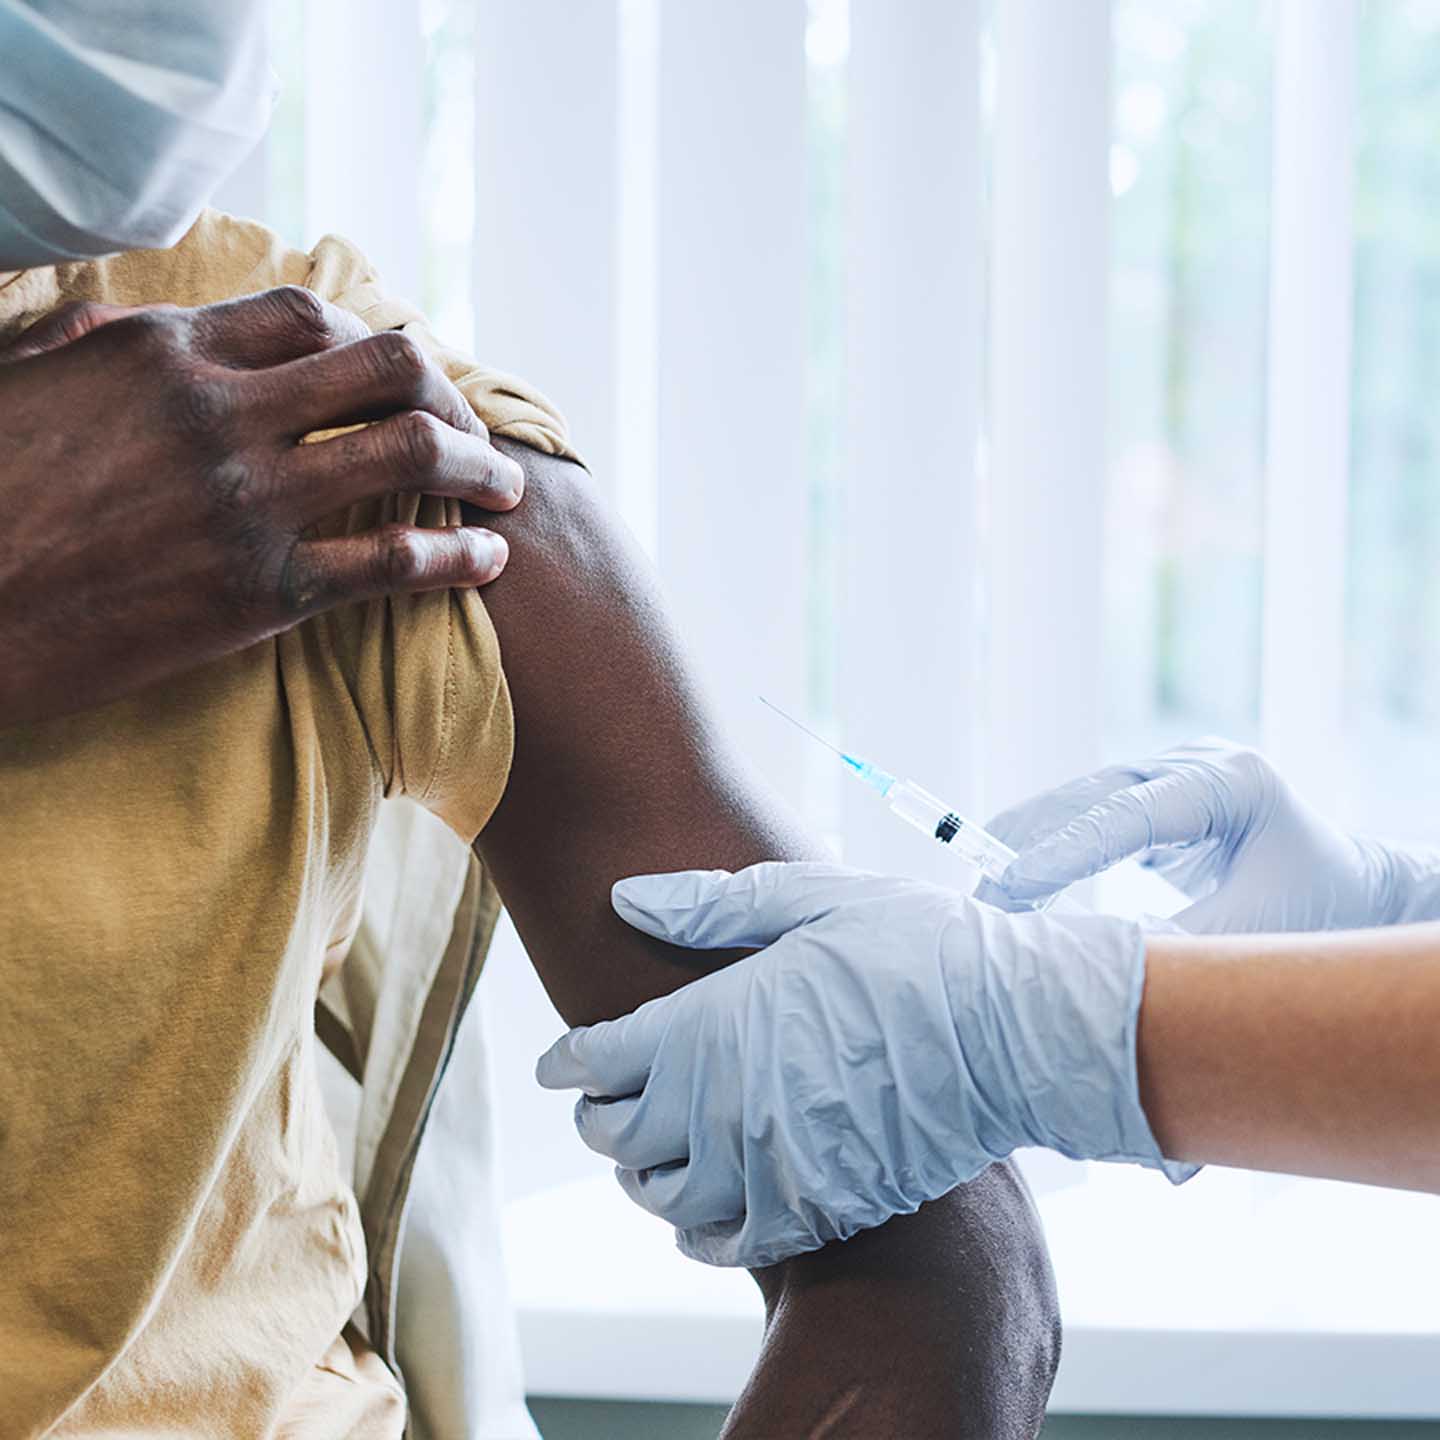 A black man receives a vaccine from a doctor